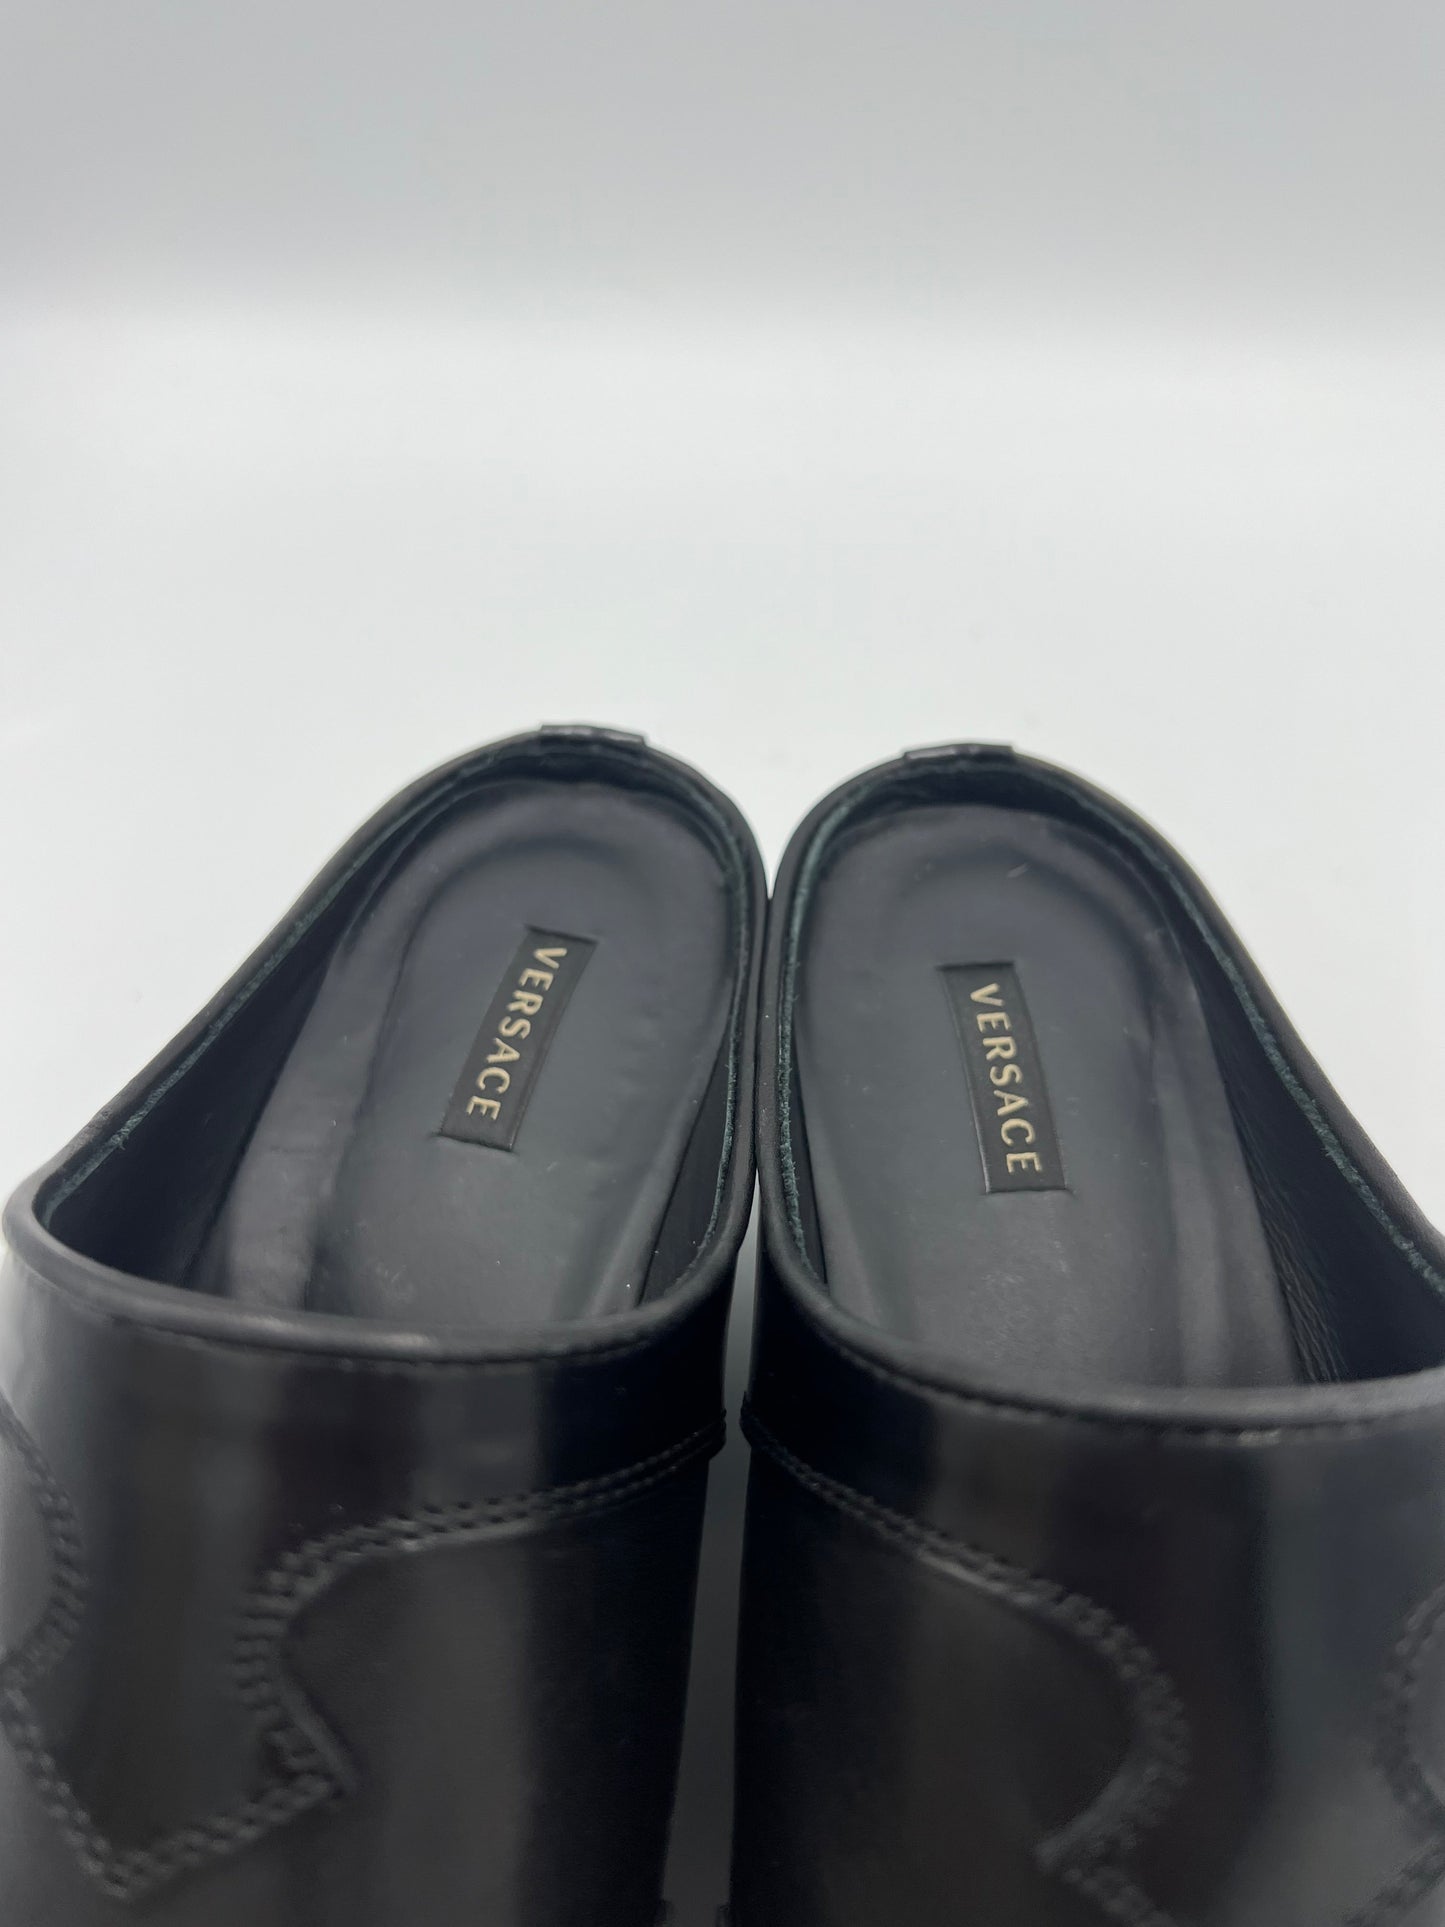 Shoes Luxury Designer By Versace  Size: 7.5